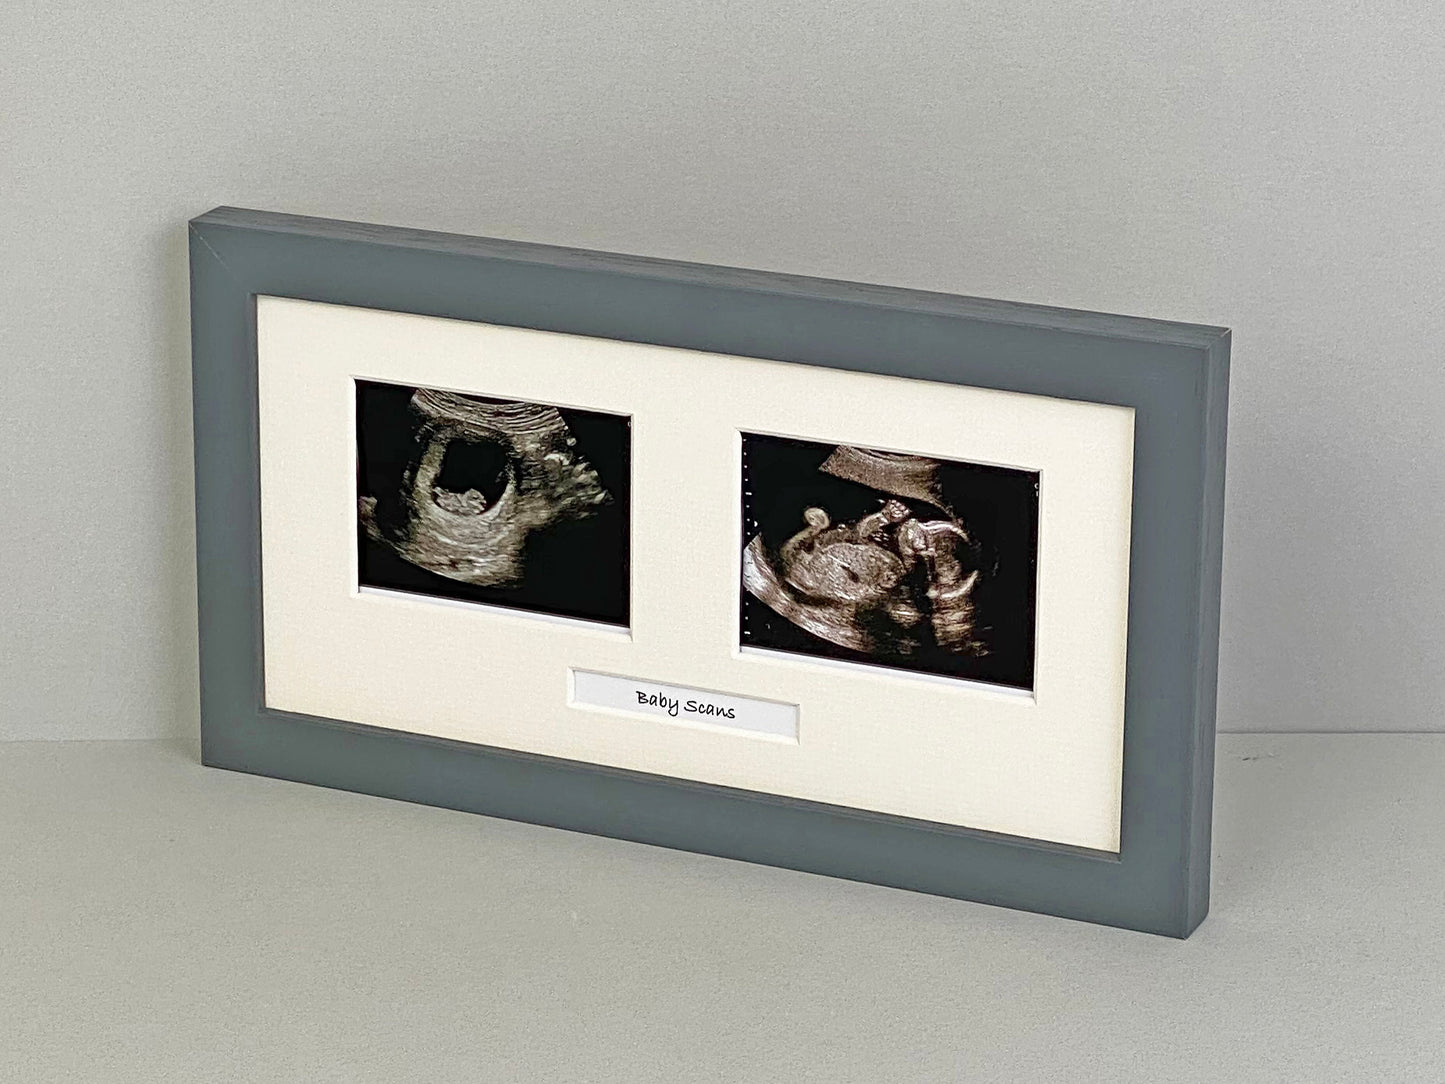 Baby Scan Frame - Landscape Multi aperture frame for Two Scans and One Text Box.